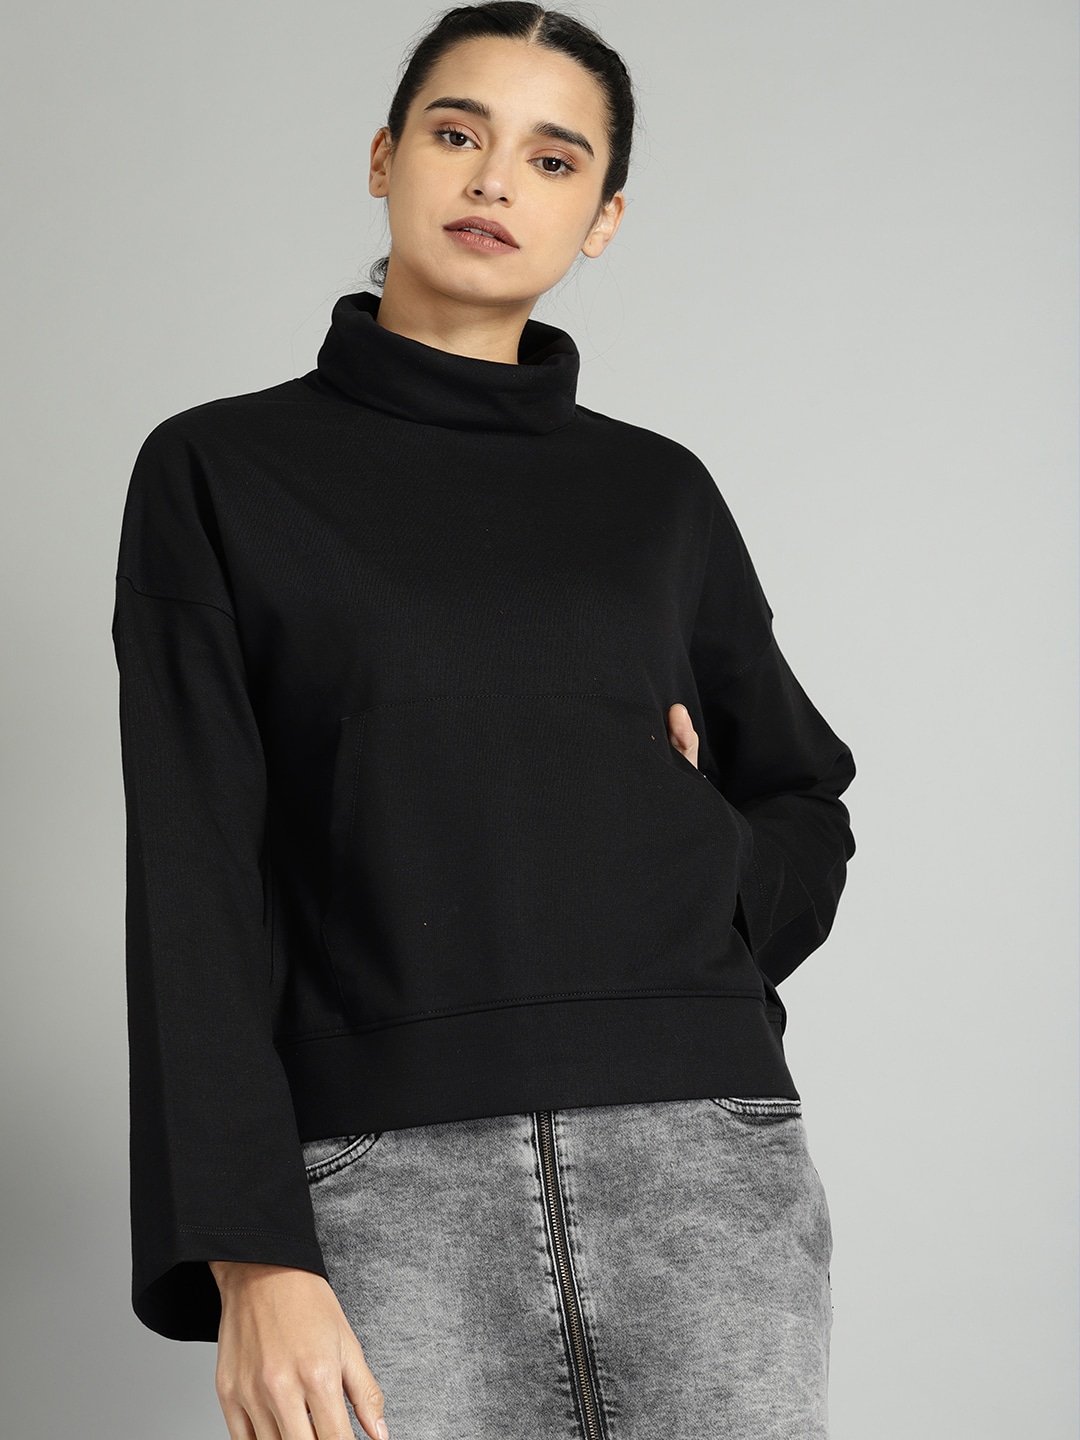 The Roadster Lifestyle Co Women Black Solid Sweatshirt Price in India